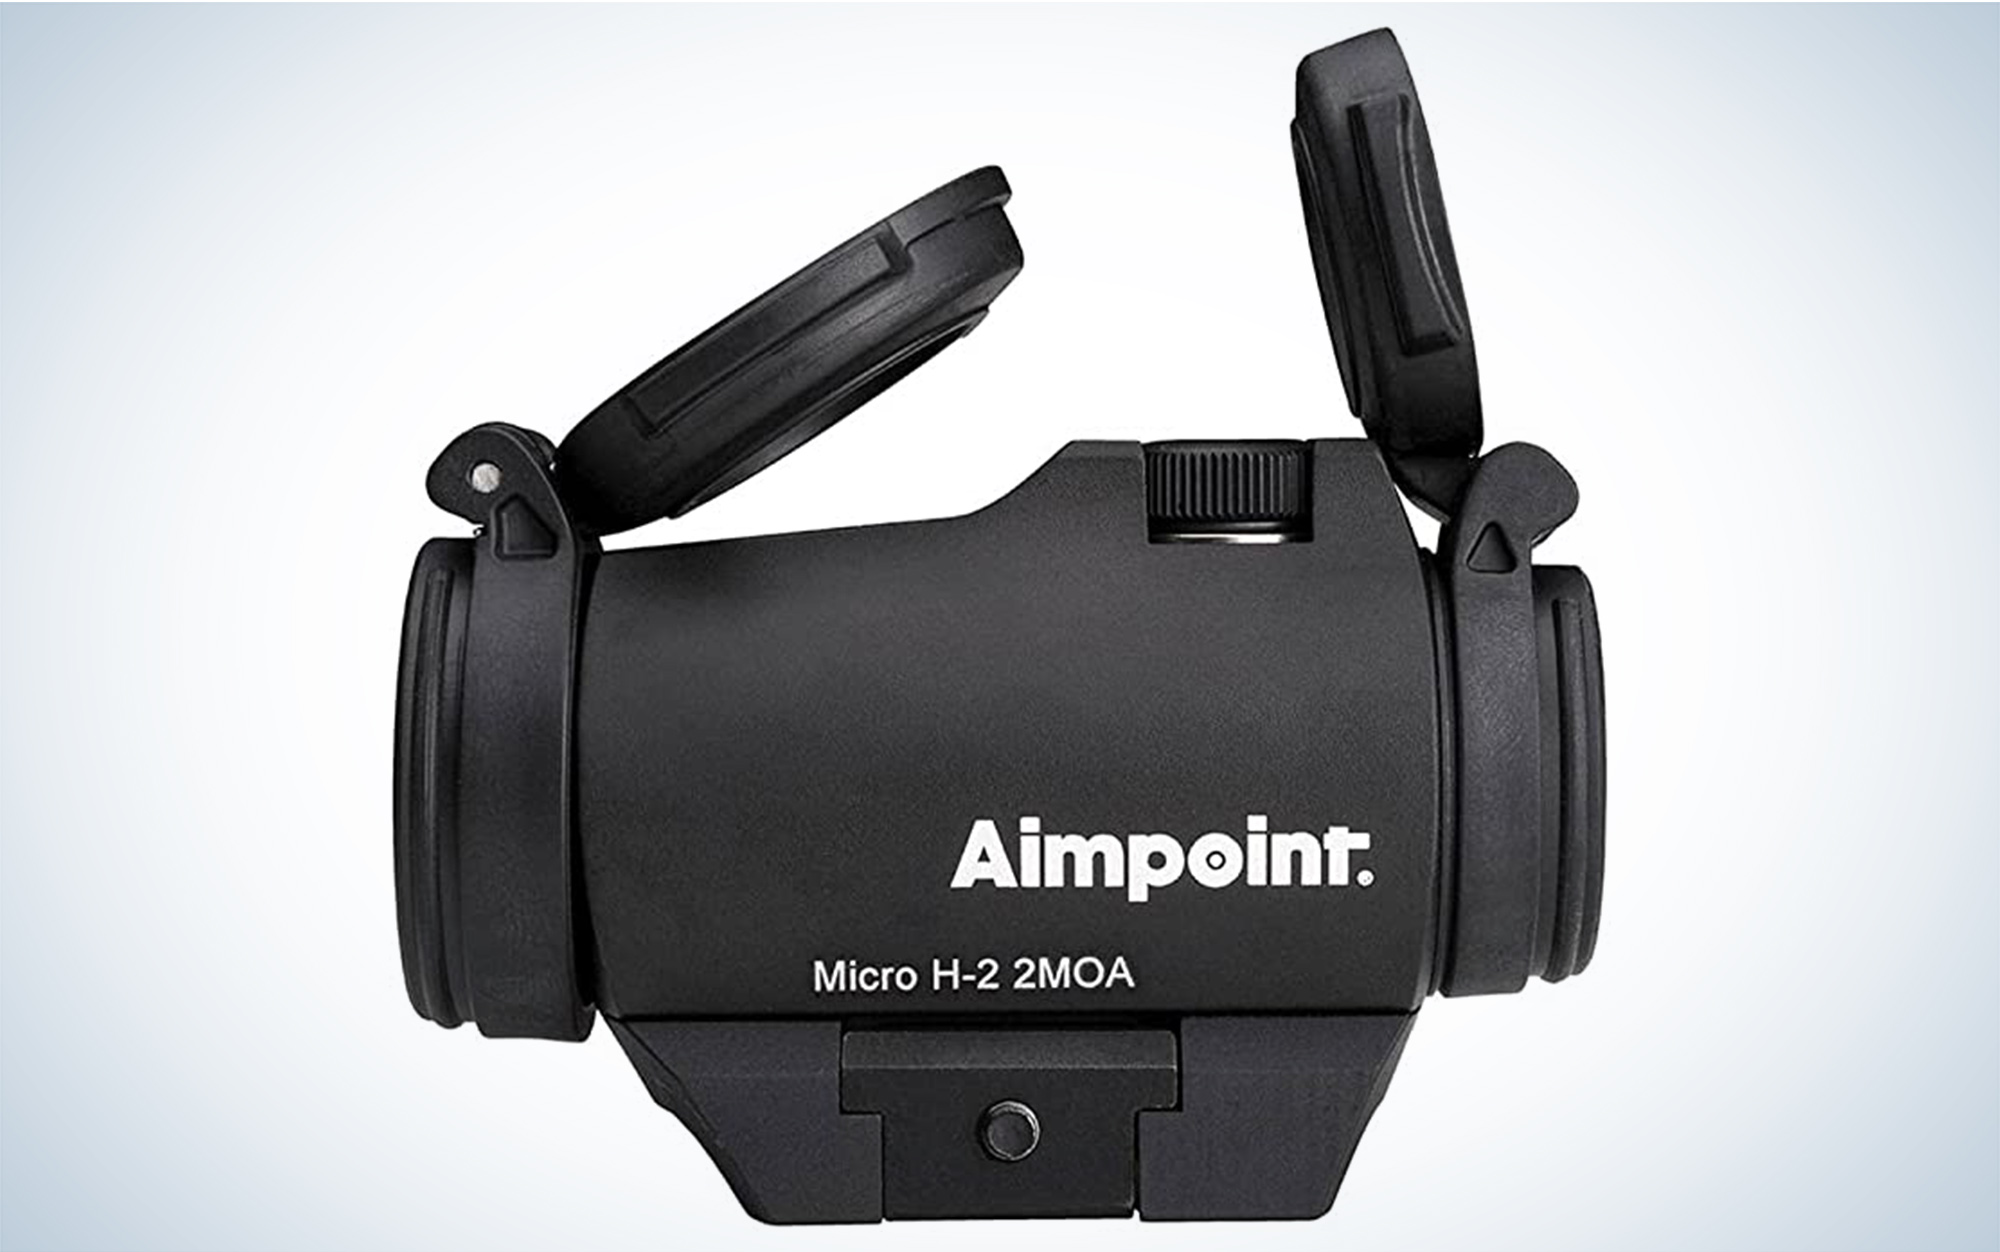 The Aimpoint Micro H-2 2-MOA Red Dot is the best for target acquisition.